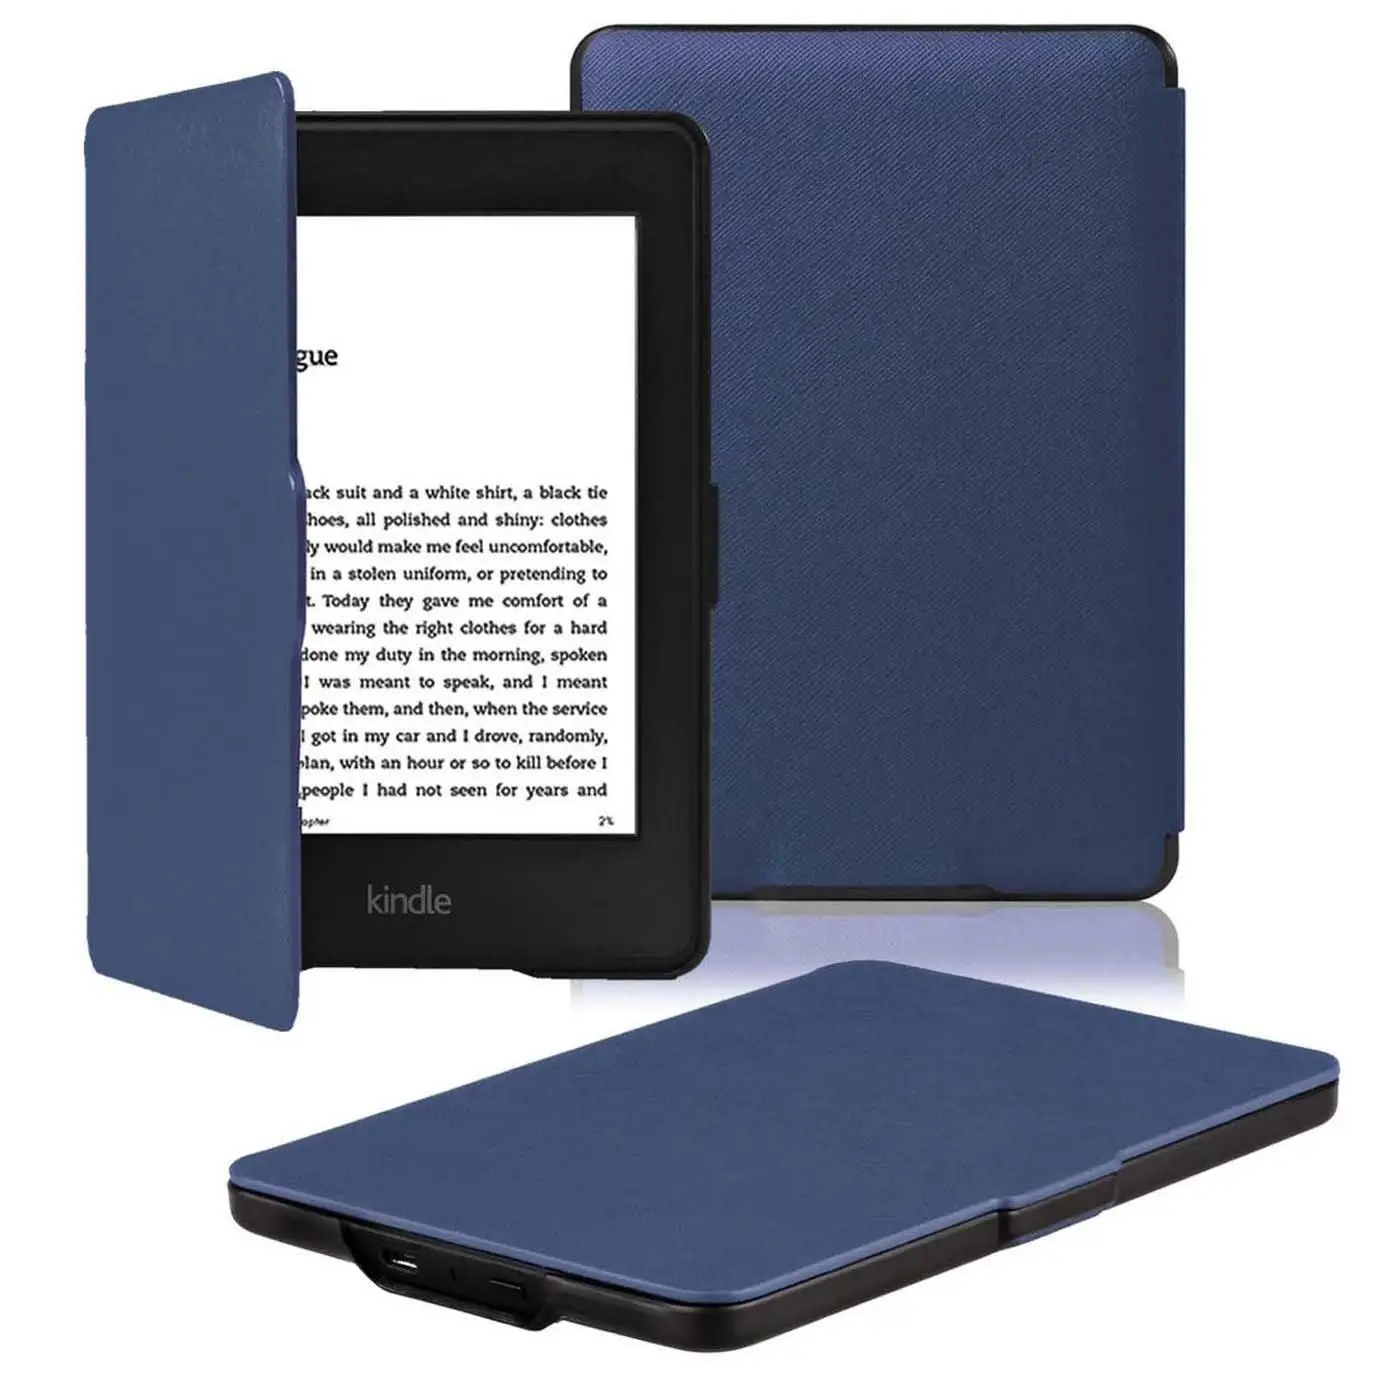 Cross Pattern PU Leather Case Slim Cover Hard Shell for Kindle Paperwhite 123 2012 2013 2015 6inch Ebook Pouch Cover